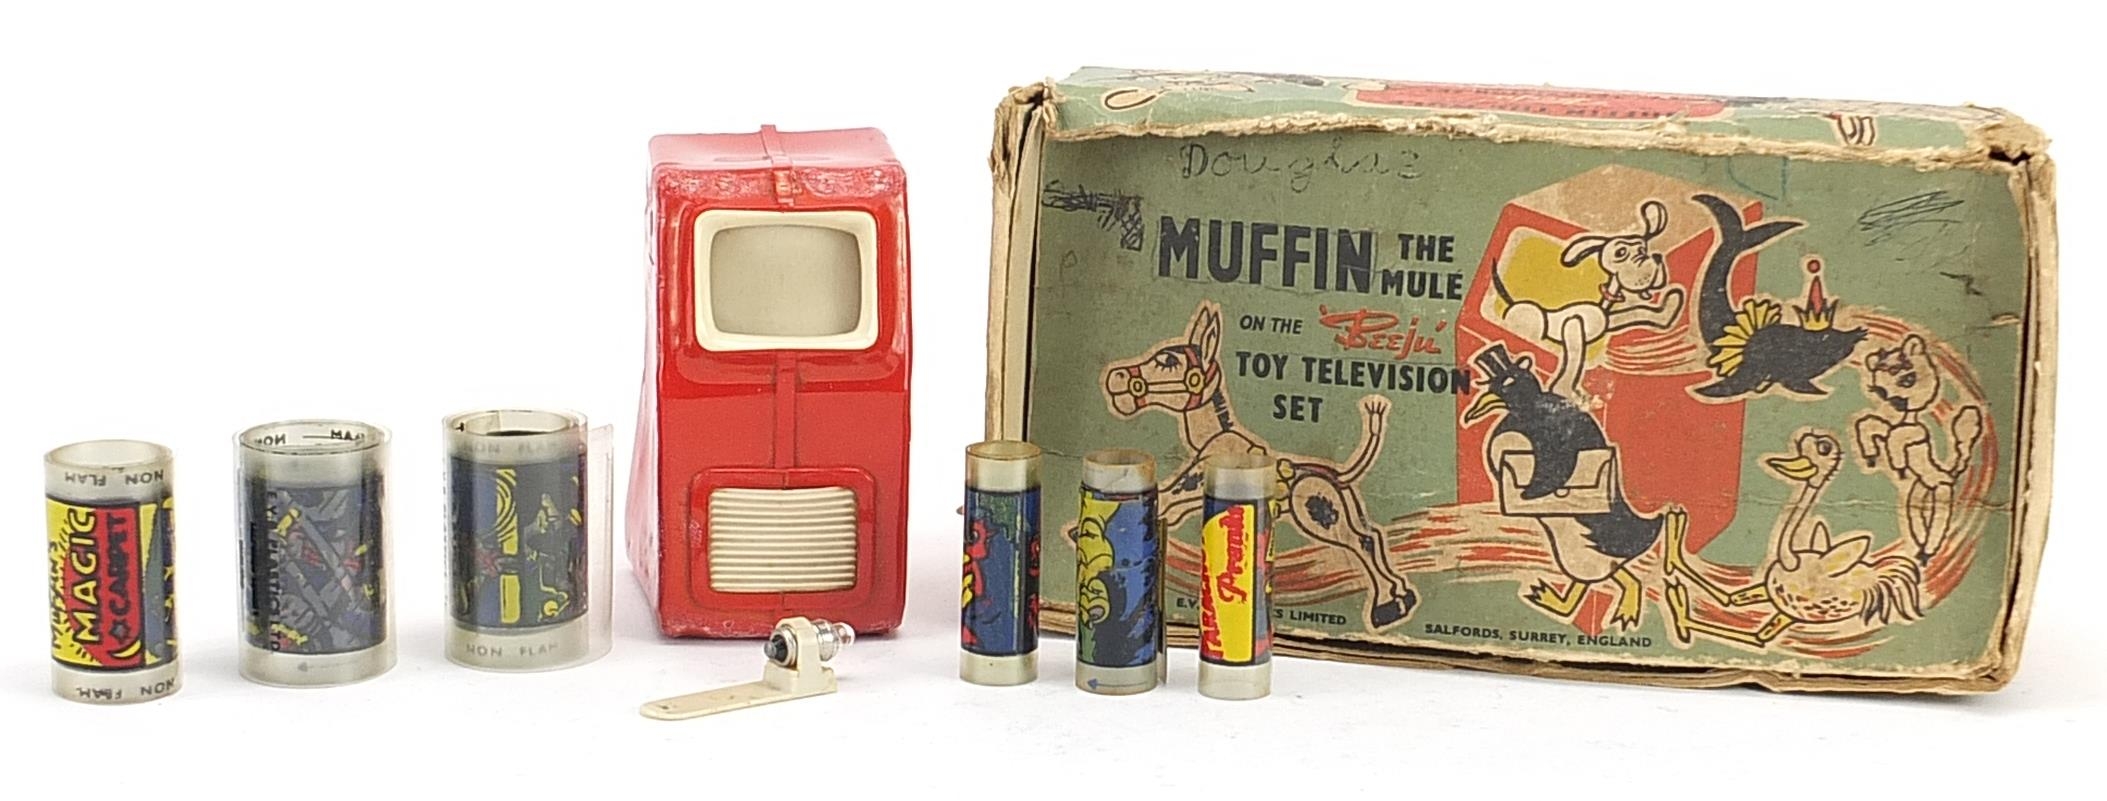 Vintage Muffin the Mule toy television set with box by EVB Plastics Ltd